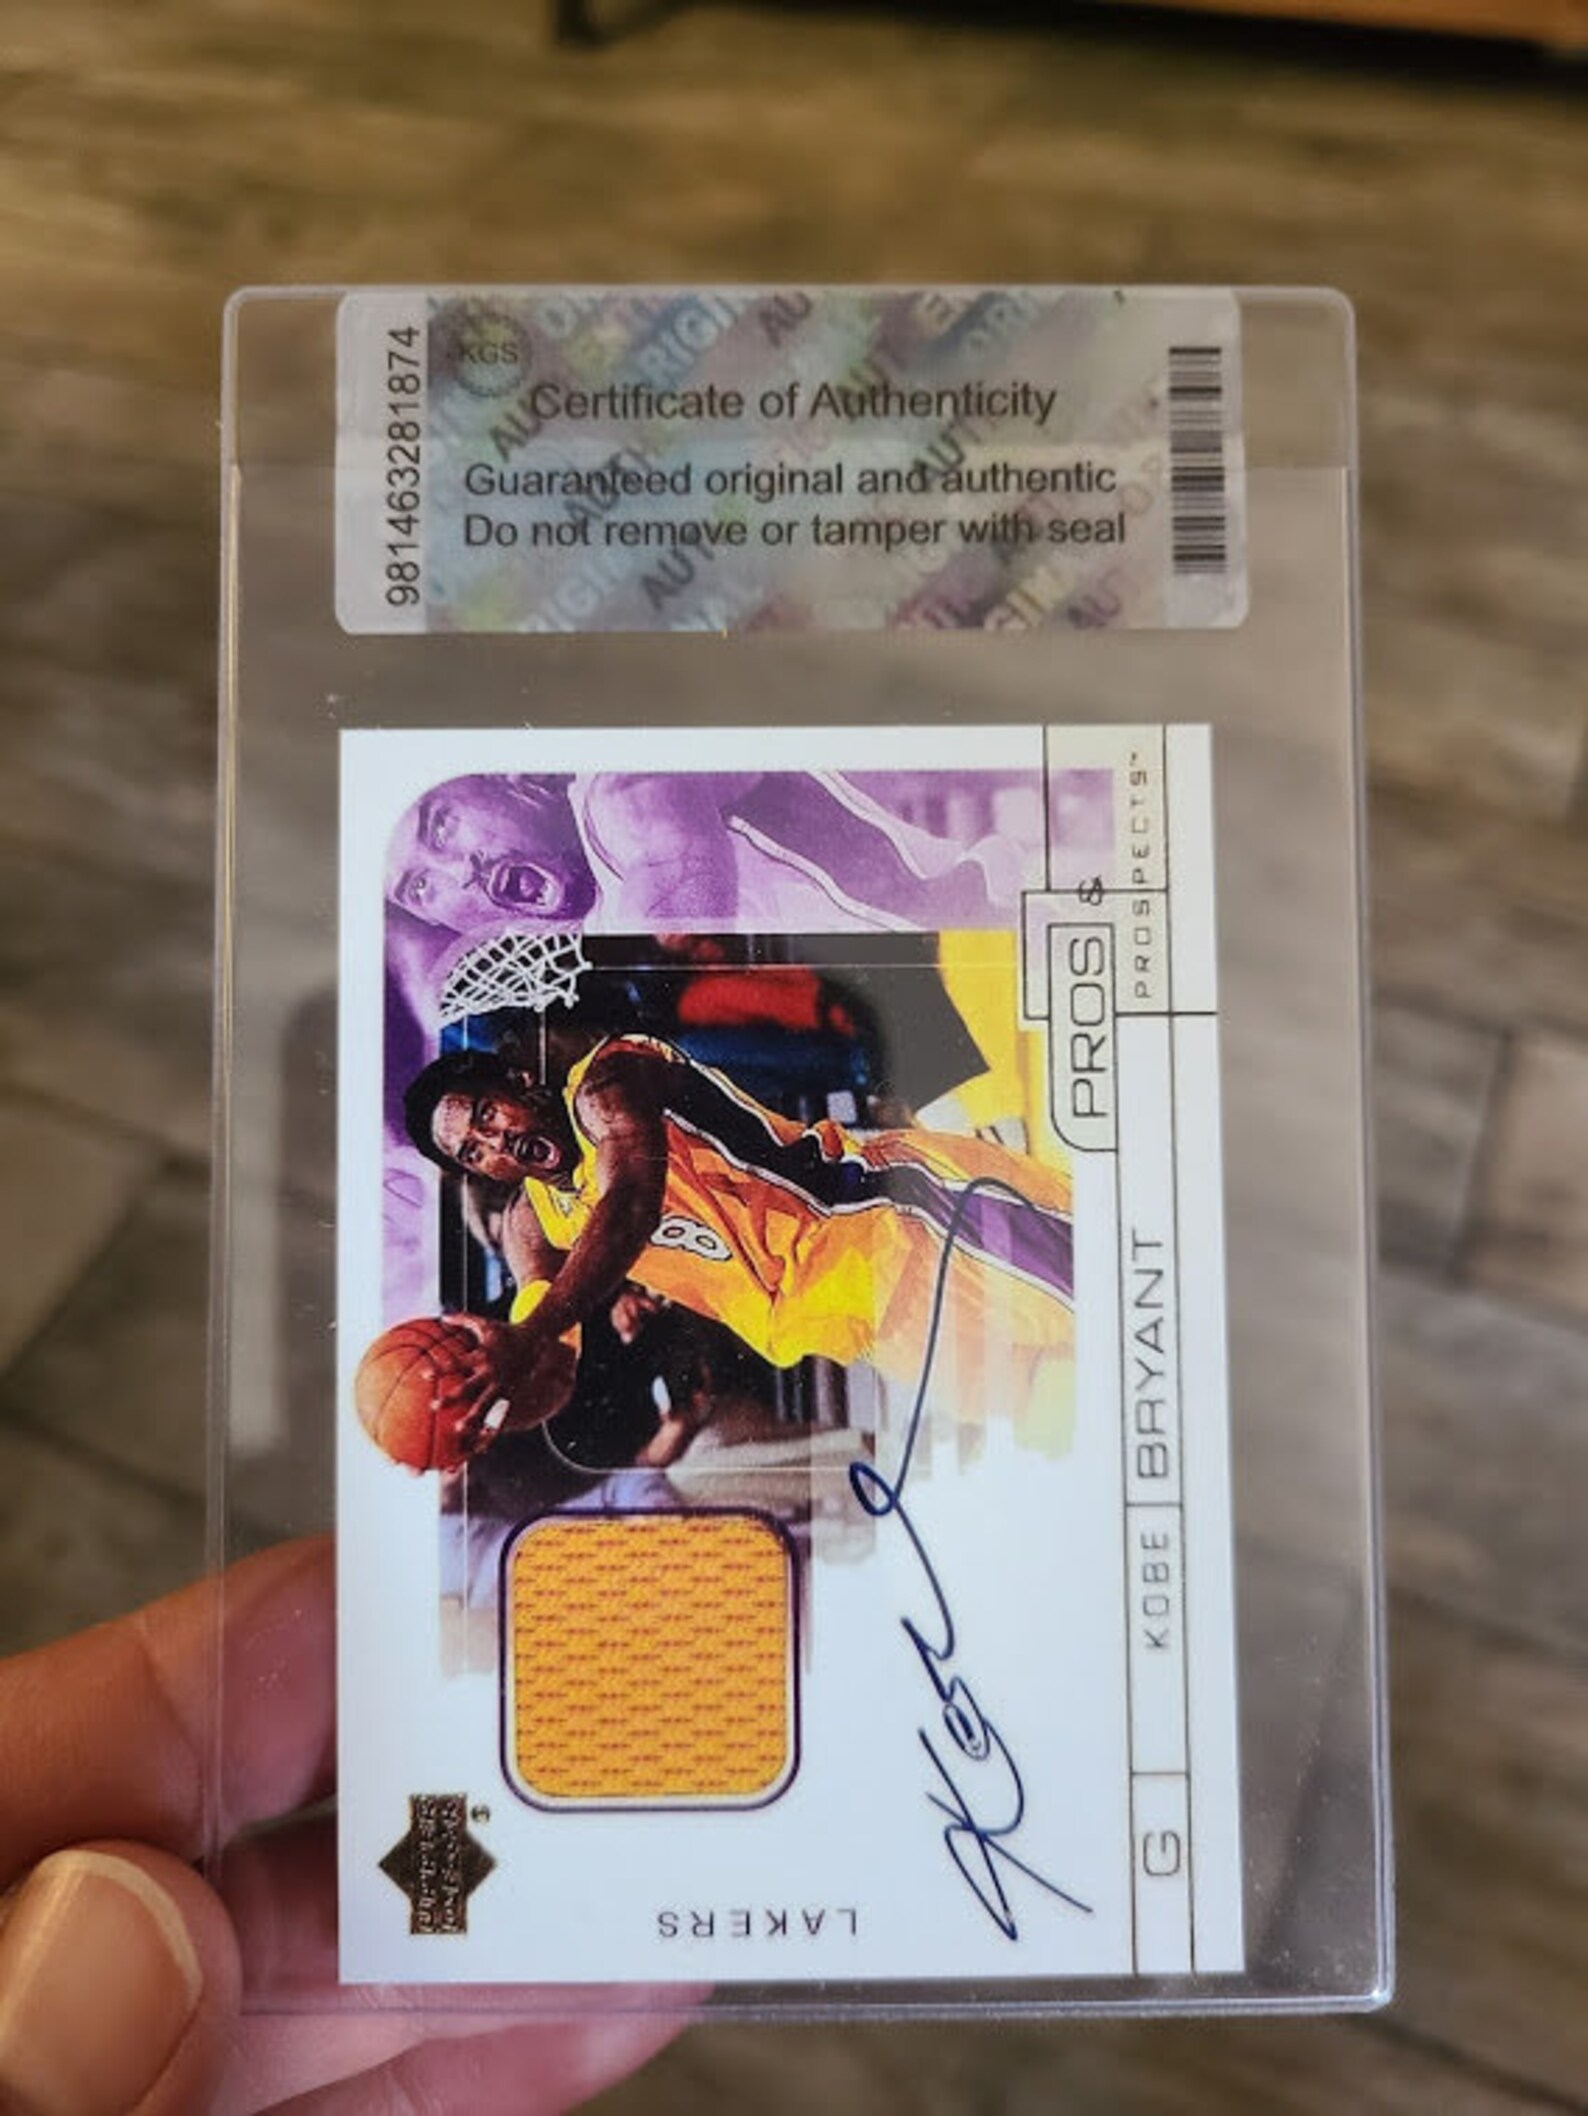 2001 Upper Deck Kobe Bryant Reprint Facsimile Auto and Patch - Etsy